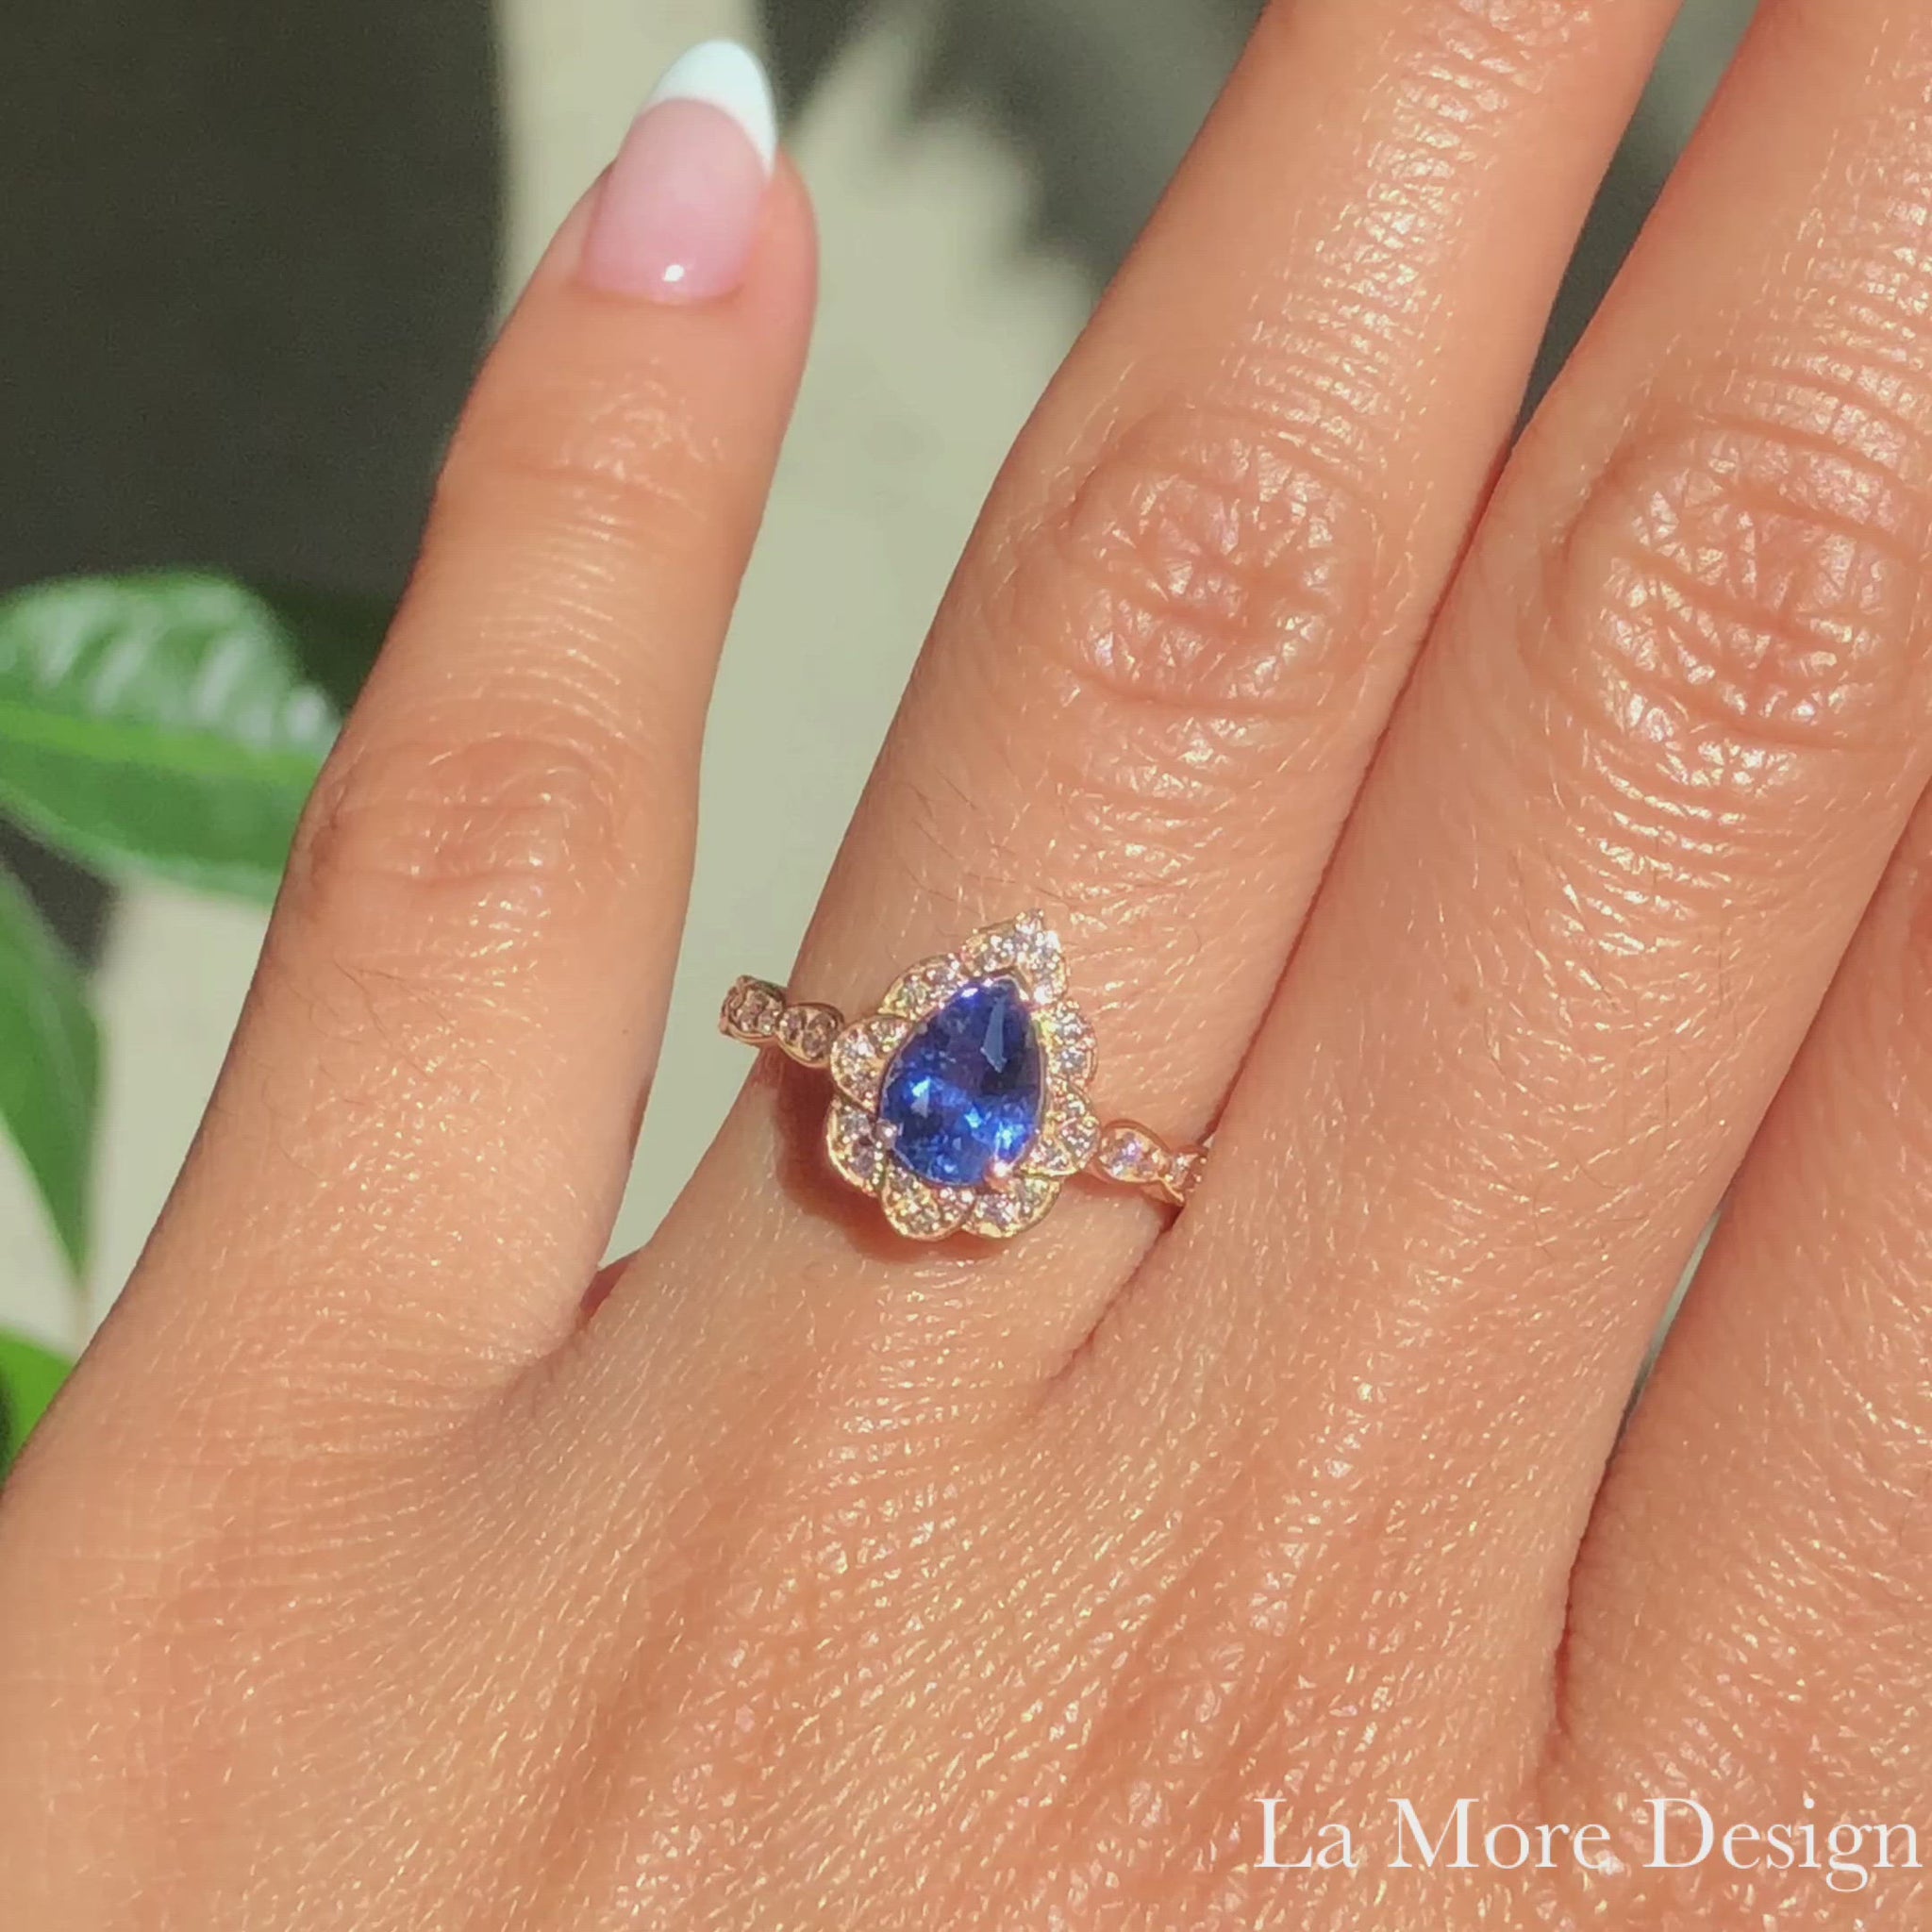 This breathtakingly gorgeous sapphire engagement ring is crafted in 14k rose gold vintage floral diamond ring setting with a 1.25-carat pear cut natural blue sapphire center ~ total gemstone and diamond weight of the whole ring is 1.57 ct.tw.  This unique yet elegant vintage-inspired pear-cut engagement ring will guarantee a big smile on your future bride's face! All our wedding bands can pair beautifully with this gorgeous vintage floral diamond sapphire ring!